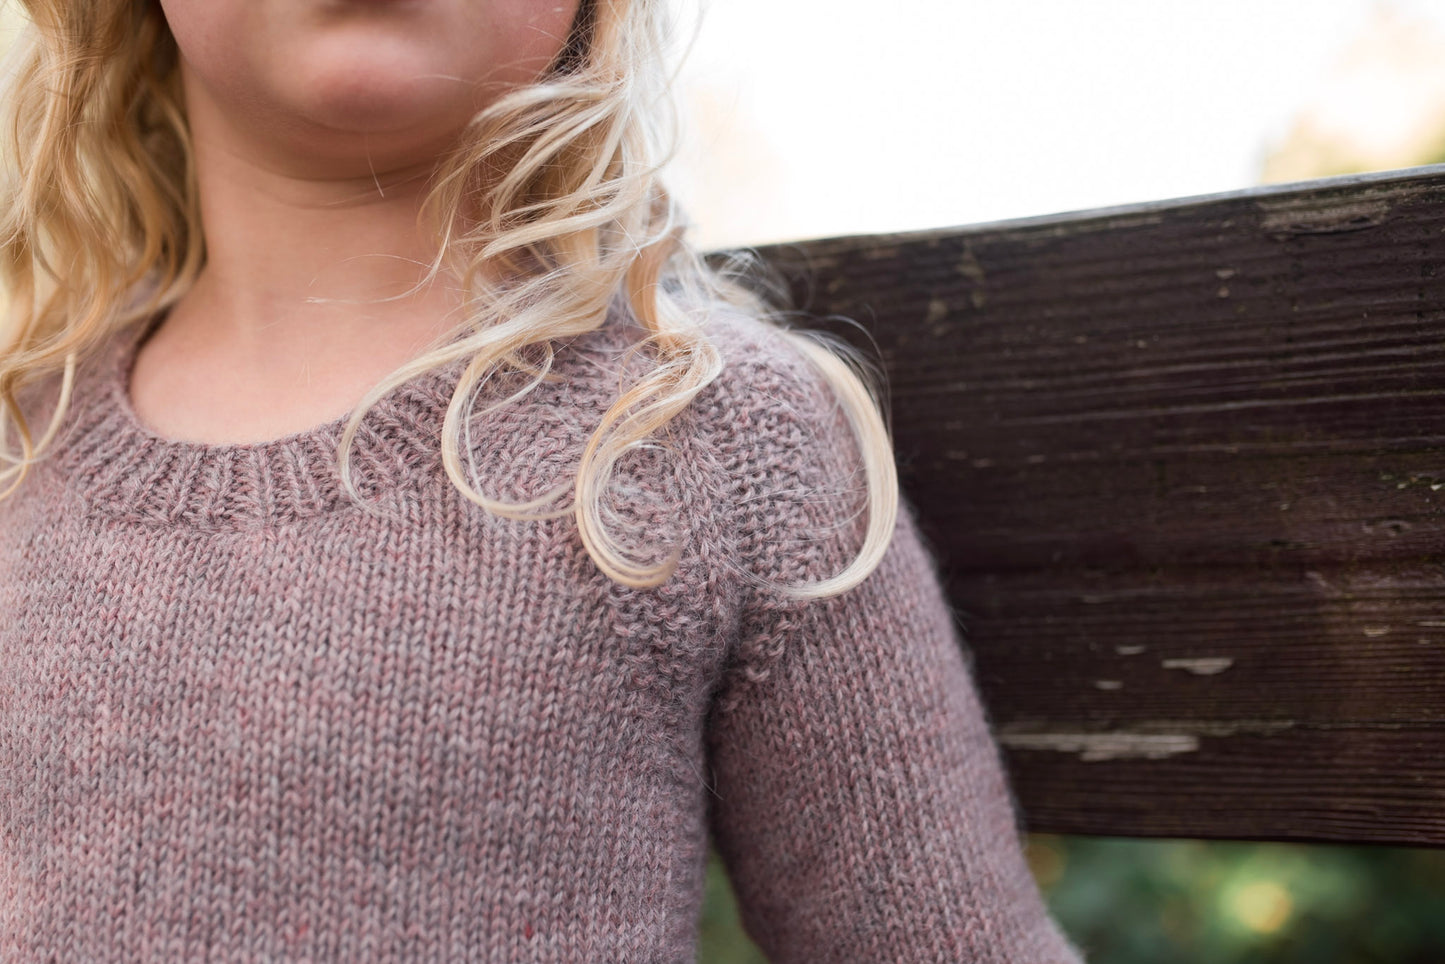 Seen close up, a girl wears a light purple knit sweater. A garter stitch embellishment is knit around the seams.